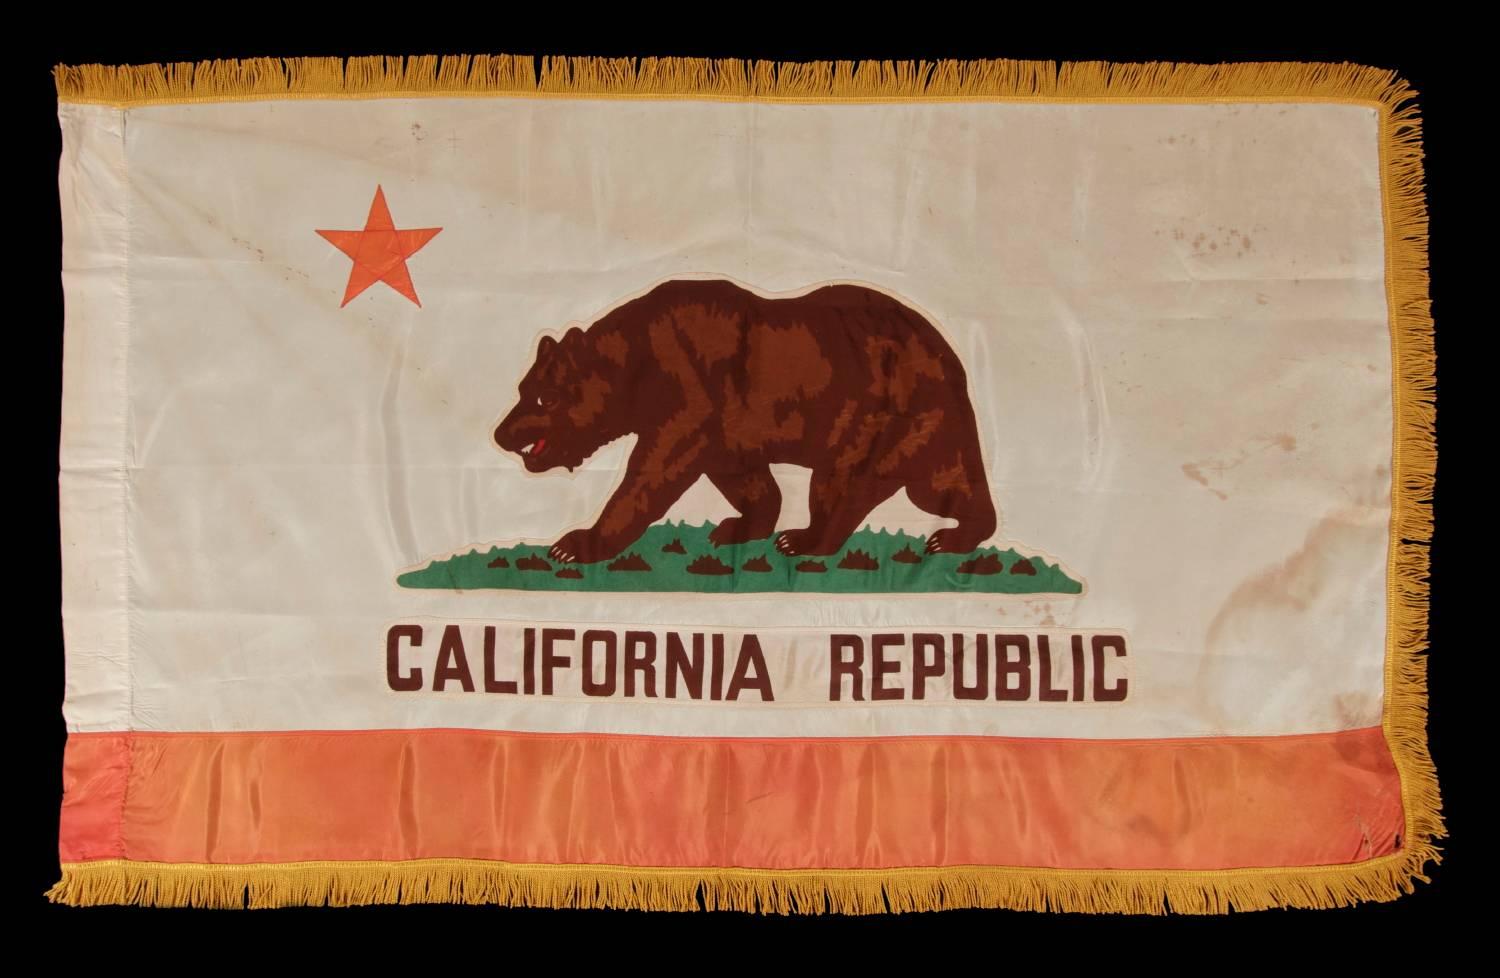 California State Flag, with especially attractive coloration and a gold silk fringe, made by Emerson Mfg. Co. In San Francisco, circa 1940-1950:

Early state flags fall between very scarce and extraordinarily rare in the antiques marketplace. One